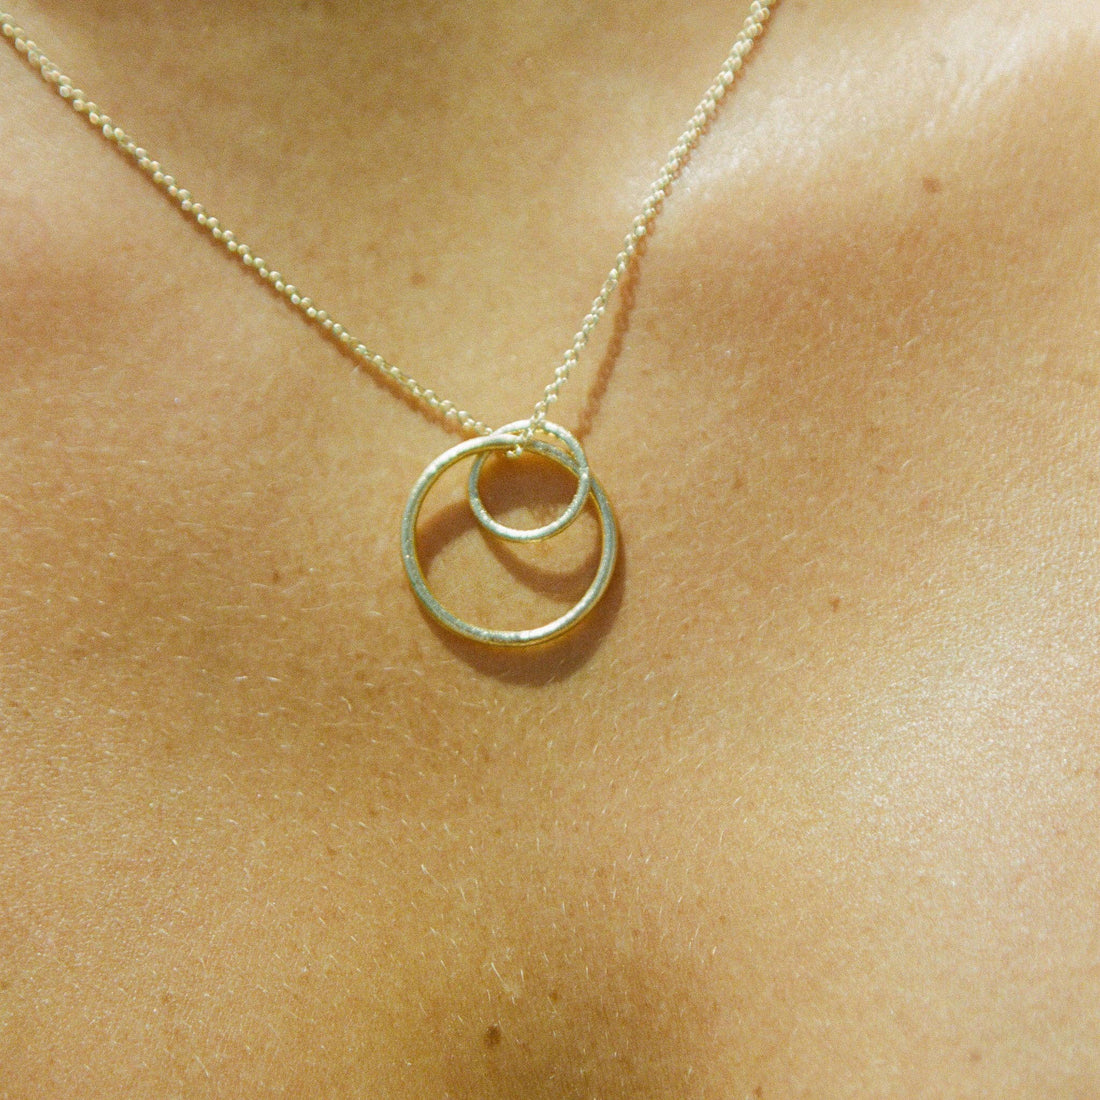 Selina Necklace | Jewelry Gold Gift Waterproof